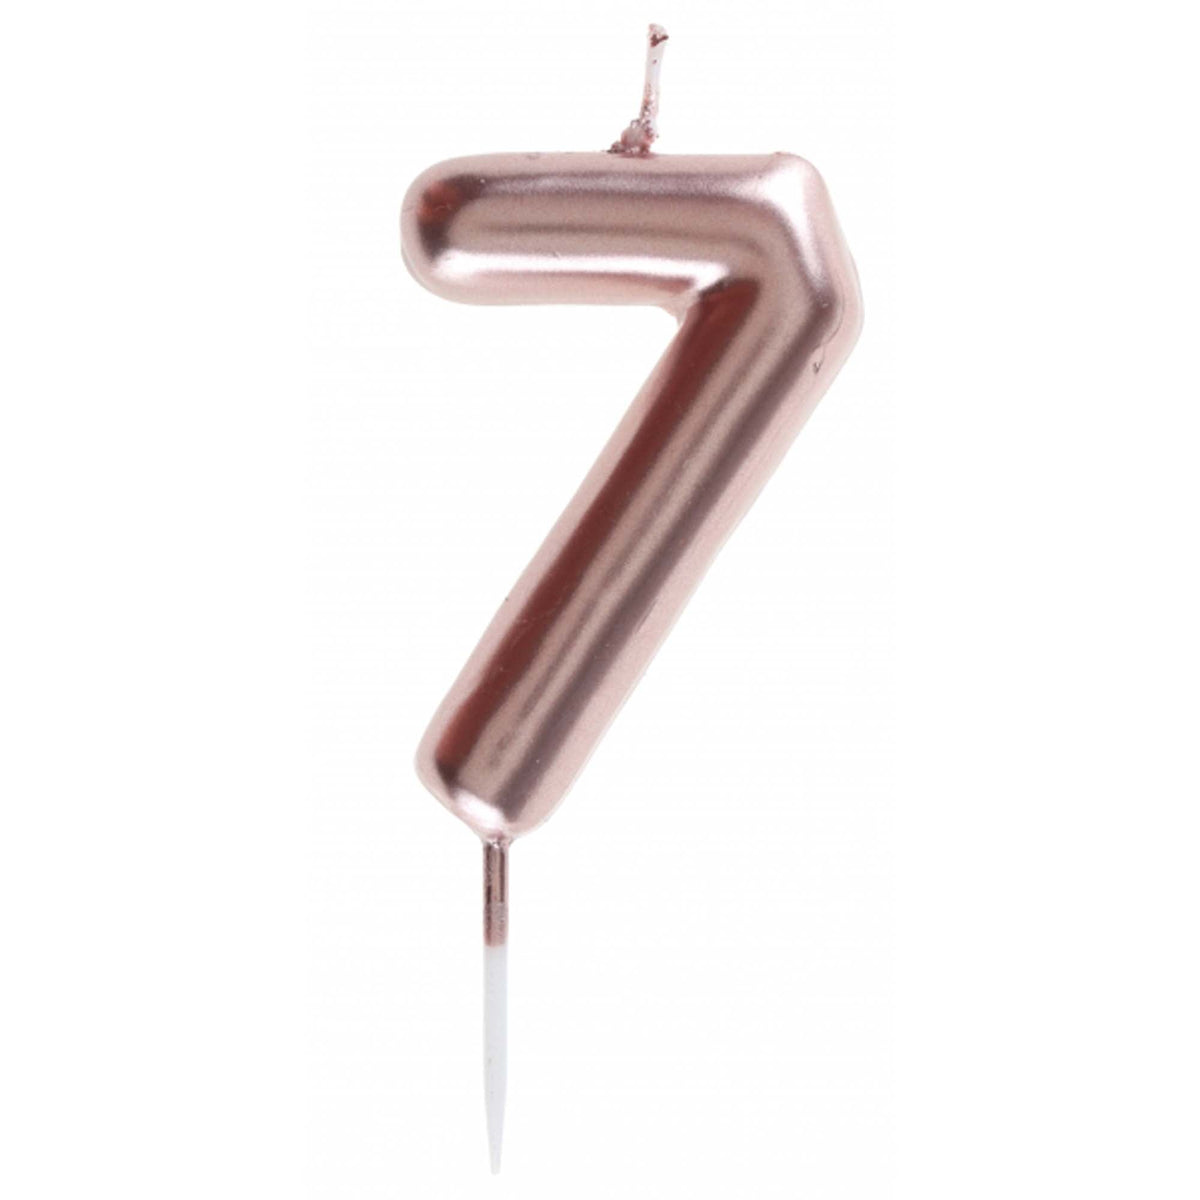 SANTEX Cake Supplies Rose Gold Number 7 Birthday Candle, 1 Count 3660380068846